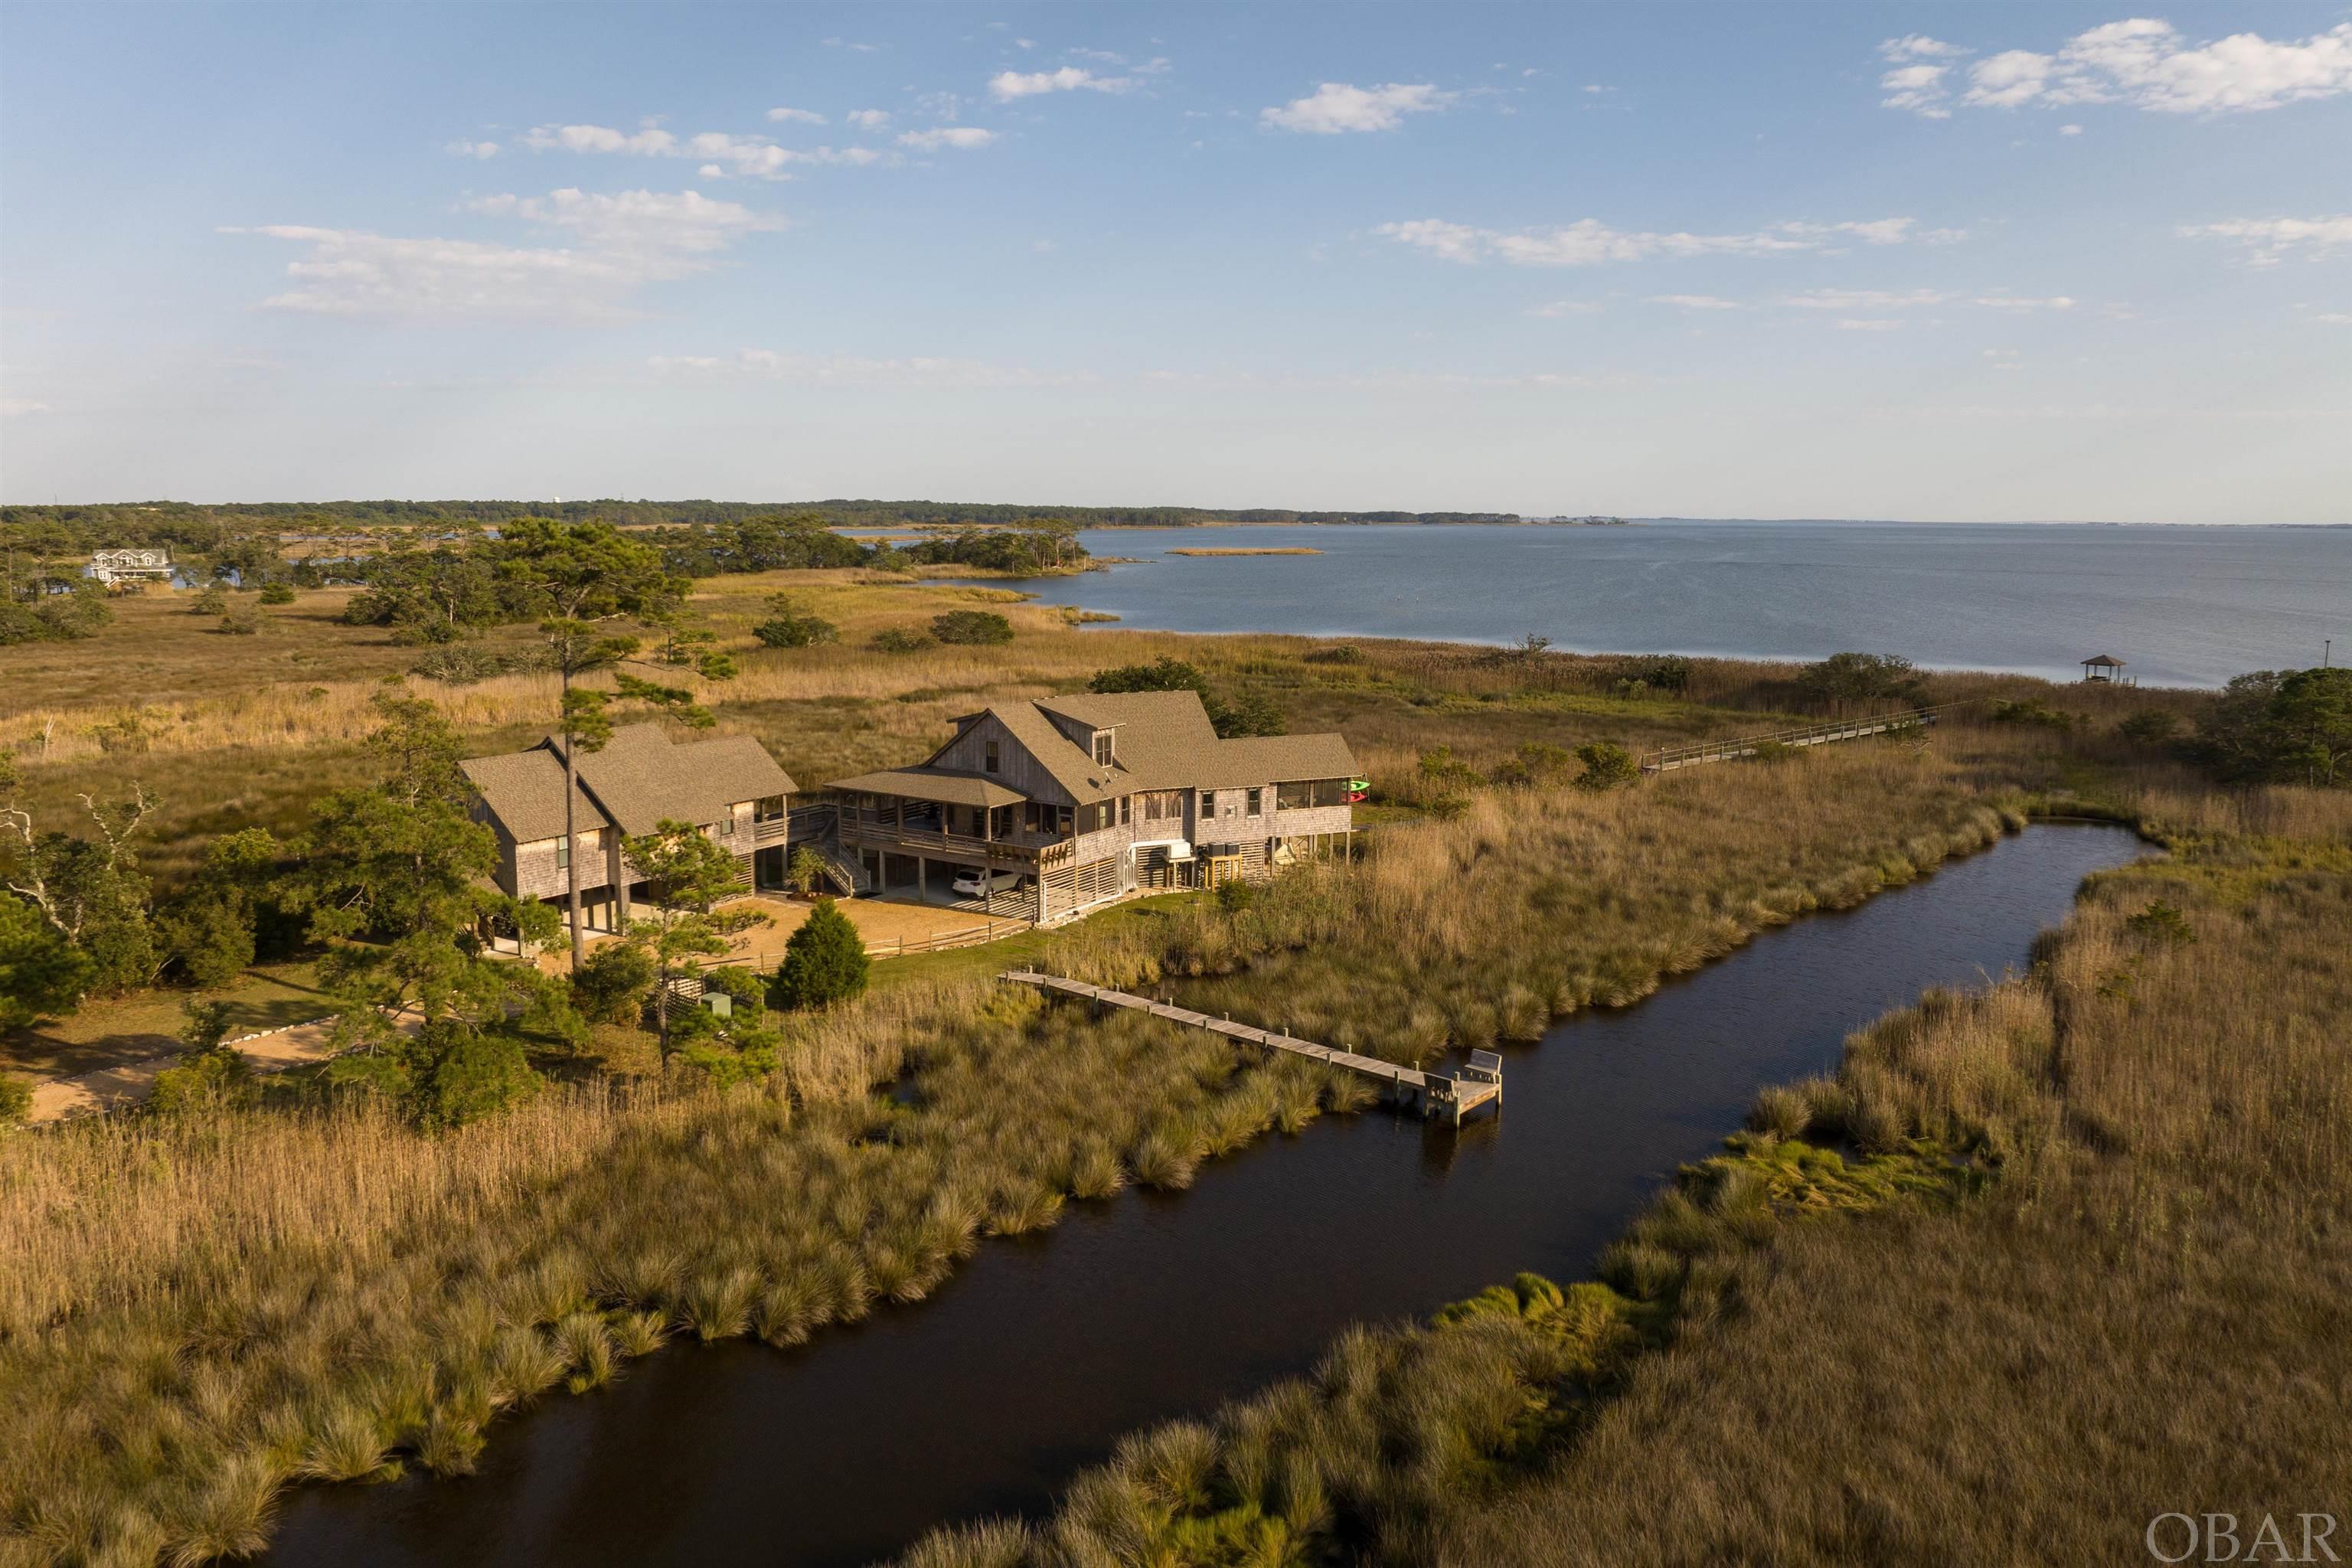 If you've been searching for a private retreat surrounded by nature, look no further than Breezy Point, a captivating 26-acre SOUNDFRONT gated estate just three miles from the Atlantic Coastline in Kill Devil Hills.  This custom-built property, featuring a gorgeous MAIN residence and DETACHED CARRIAGE HOUSE, was designed to meld seamlessly with its natural surroundings, offering a sense of calm, comfort and quietude to all who enter.  Opportunities to connect with nature abound, with wildlife such as deer, rabbits, and otters as well as waterfowl and marine life spotted frequently.  After nightfall, the property is enrobed in starlit skies and moonlit waters.  Both the main residence and carriage house were designed to take full advantage of the coastal scenery.  The main residence features reclaimed and refinished yellow pine flooring throughout and consists of either 3 or 4 bedrooms (depending on your desires for the space) and 2.5 baths, with designer details and luxurious touches throughout the space.  The main level offers a bright and open living area featuring a gas fireplace with custom yellow pine surround, custom window seats with built-in storage, and access to a massive soundfront screened porch.  The gourmet kitchen features new stainless appliances, durable and elegant soapstone countertops, custom cabinetry, and a walk-in pantry.  There is also a fabulous pass-through butler's pantry that transitions to the dining room, which also offers al fresco dining thanks to another adjacent screened porch.  Wake up to dazzling sound views from the primary suite, which is conveniently located on the main level and features built-in window seating with storage, an attached screened porch, and a luxurious private bath with heated marble tile flooring, tiled shower, double sink vanity with marble top, and easy access to both the adjacent walk-in closet and laundry room.  Depending on your needs, upstairs, you will find two to three additional guest rooms along with a shared bath with double sink vanity and custom tiled bath surround, all situated around a spacious loft with marsh and canal views.  The detached carriage house is absolutely gorgeous, with reclaimed and refinished oak flooring, 15-foot ceilings, designer lighting, and transom windows.  This space can be tailored to fit a variety of needs, such as a guest cottage, gameroom and media lounge, home office, or artisan's studio.  The kitchenette can be easily expanded into a full kitchen thanks to a capped gas line in the east wall.  This space also offers expansive storage, luxurious full bath, covered parking and private entry, and its own whole home generator, along with sprawling views of the marshes and sound beyond.  There is no shortage of outdoor living area, with covered porches, screened porches, and sun decks ensconcing the perimeter, along with a massive ground level lounge space perfect for crab picking or a lowcountry boil at sunset with friends.  Meander through the marsh grasses on the private concrete walkway to take in breezes on the soundfront pier and gazebo, or read a book or catnap in the secluded screened pond house.  Launching your kayak, paddleboard or boat is easily accomplished at the private boat dock situated along the canal.  From the custom architectural details, to the breathtaking views, to the many opportunities to connect with nature, this unique, expansive property is a picturesque private paradise.